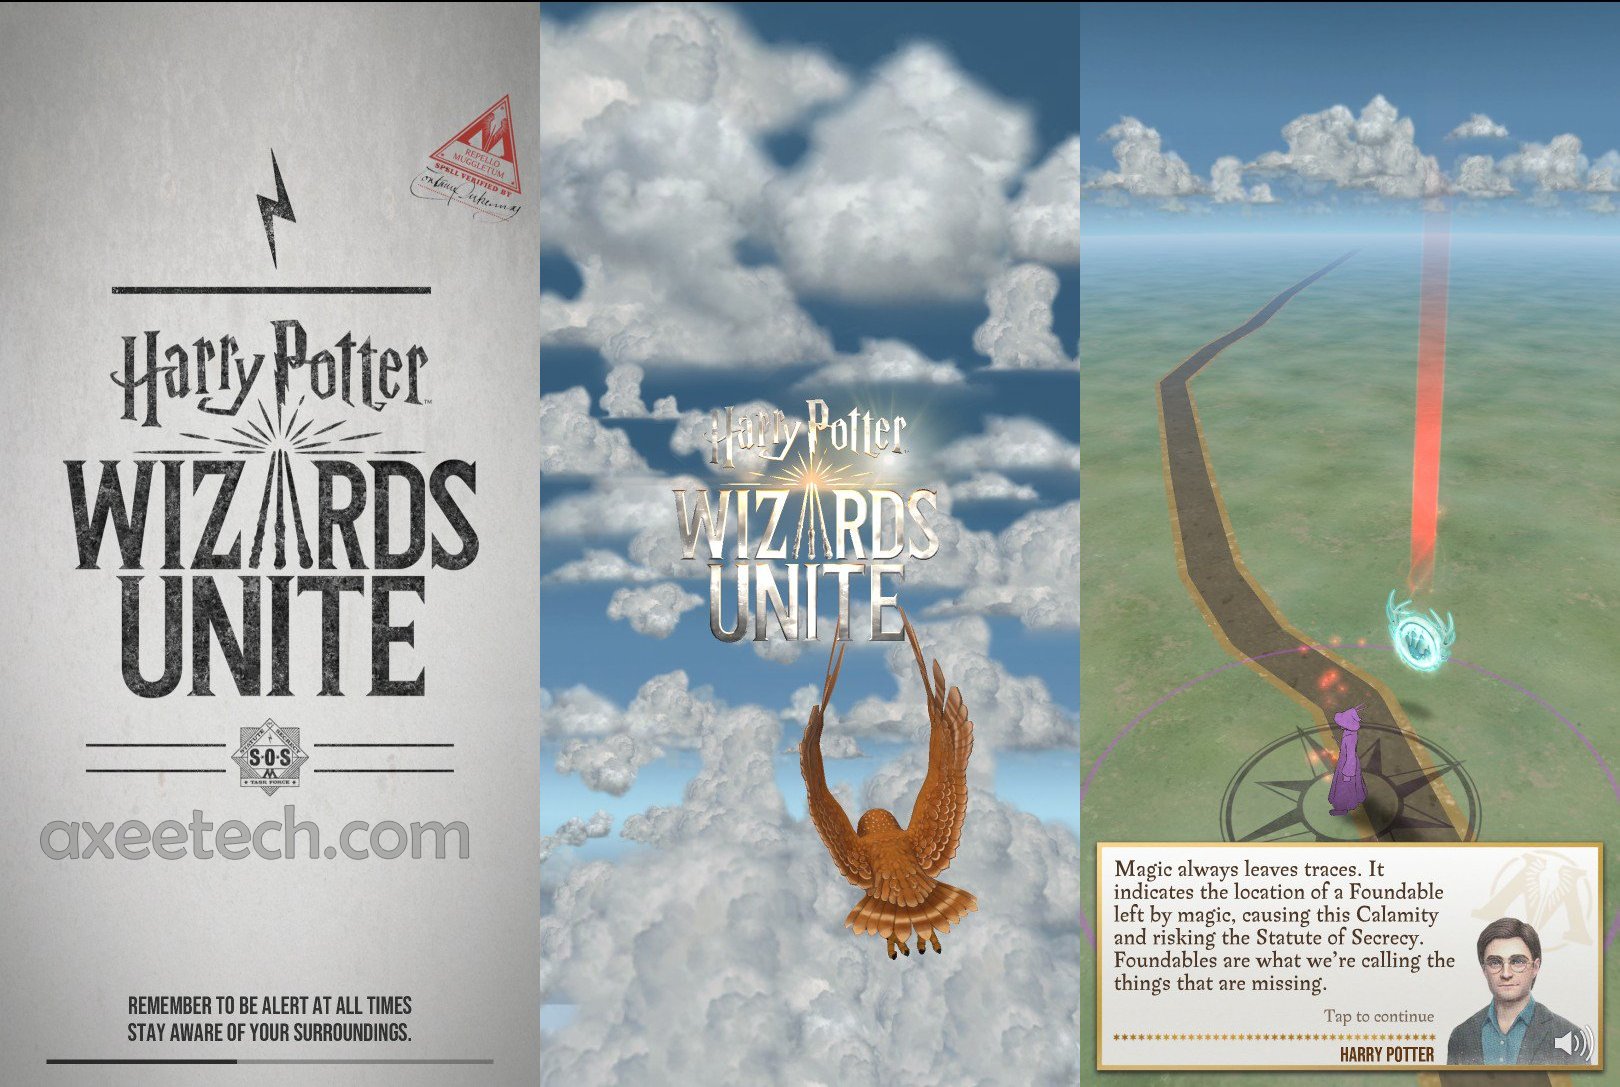 Harry Potters Wizards Unite Device Not Compatible issue